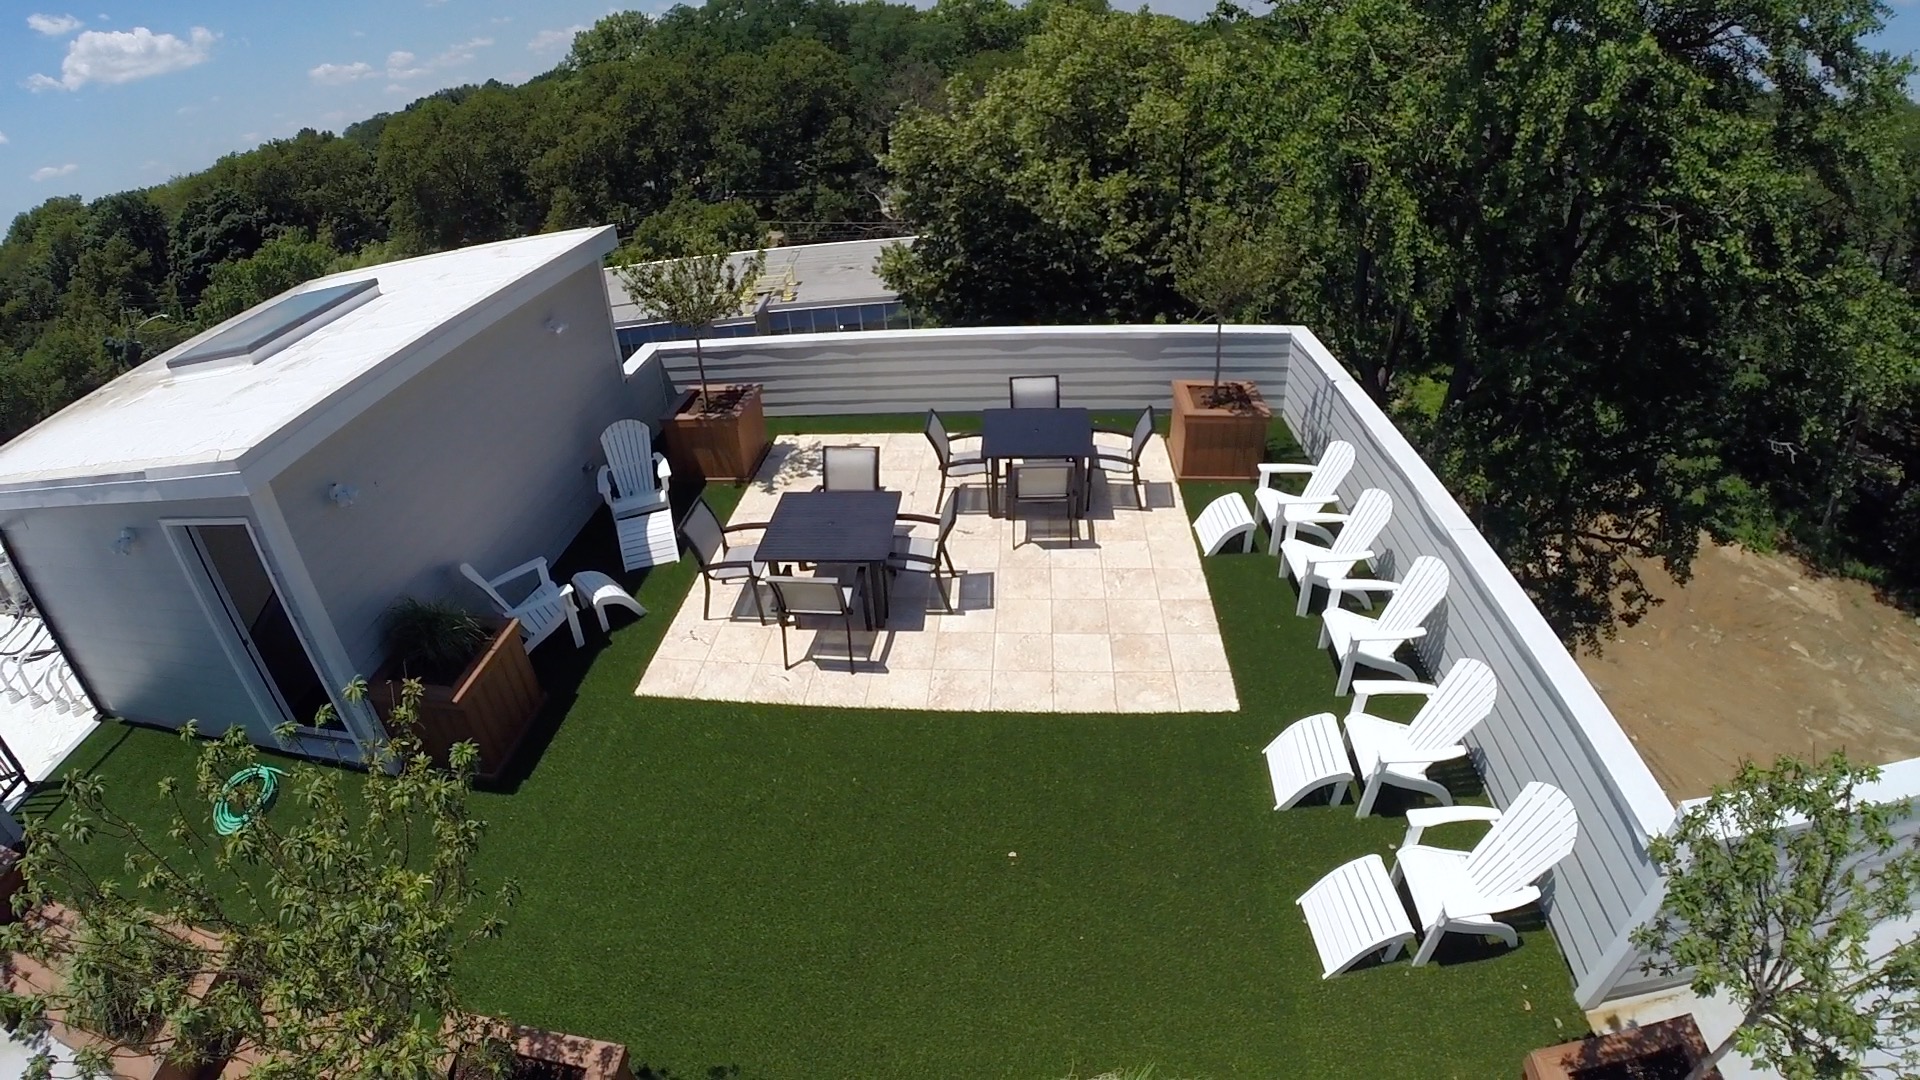 Roof top with an artificial turf patio lined with lounge chairs